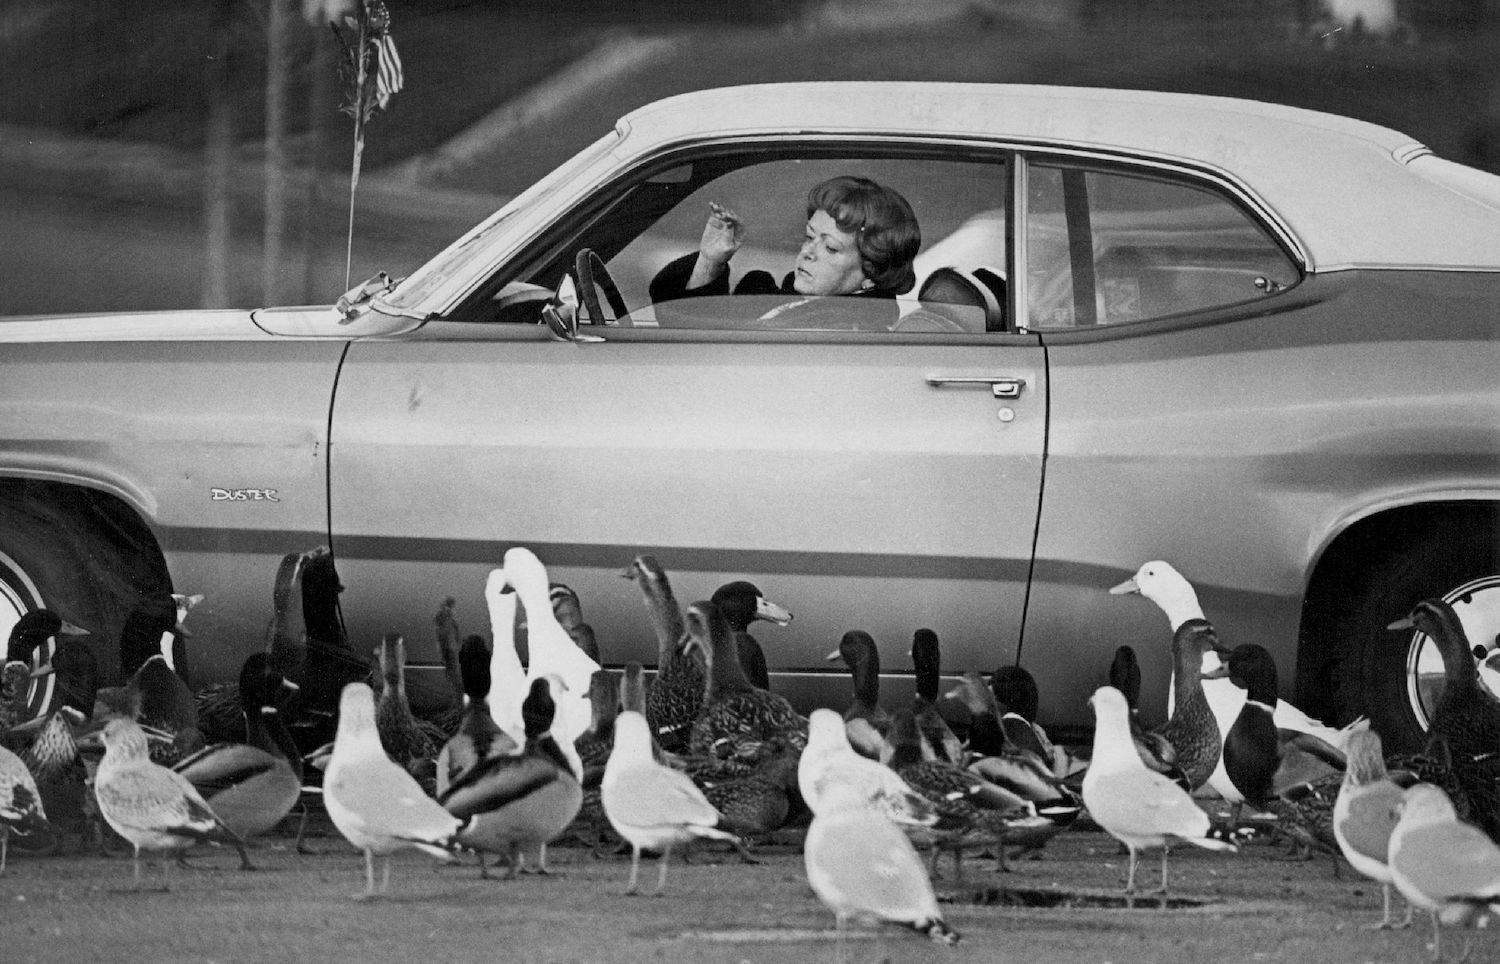 Ducks surrounding a Plymouth Duster